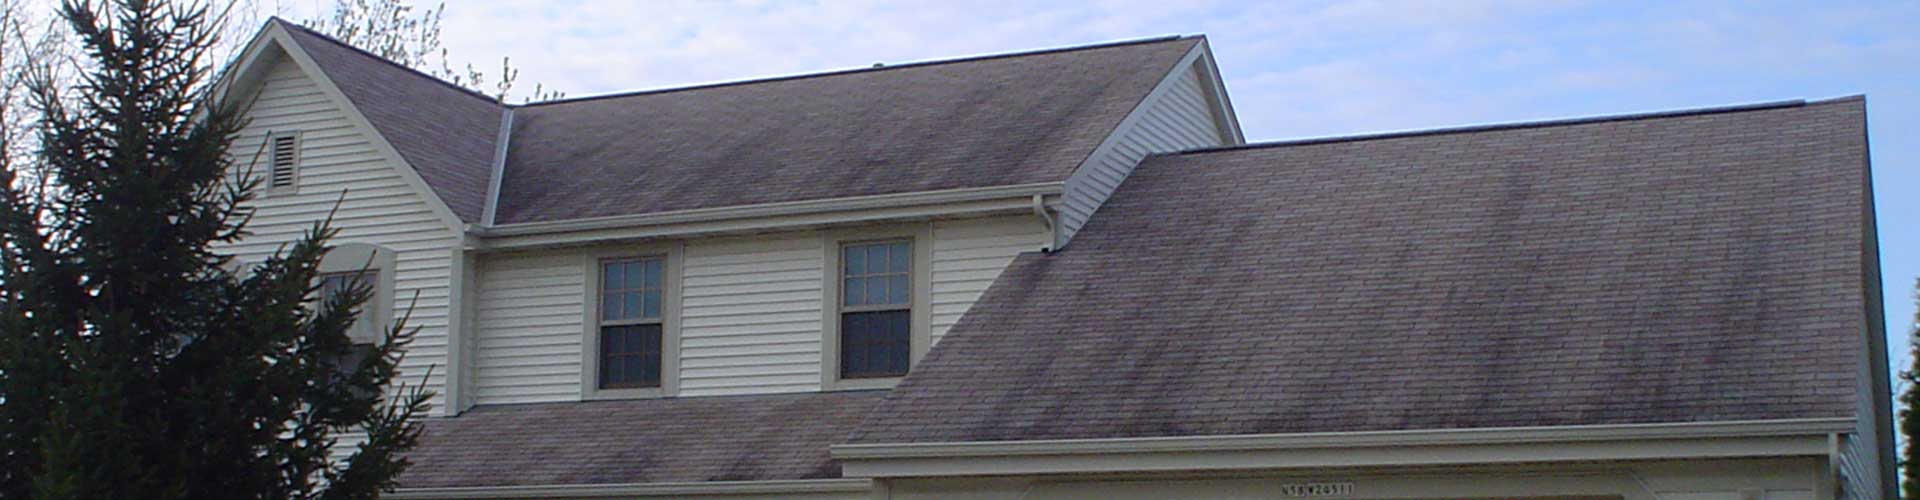 Algae cause roof stains on a home